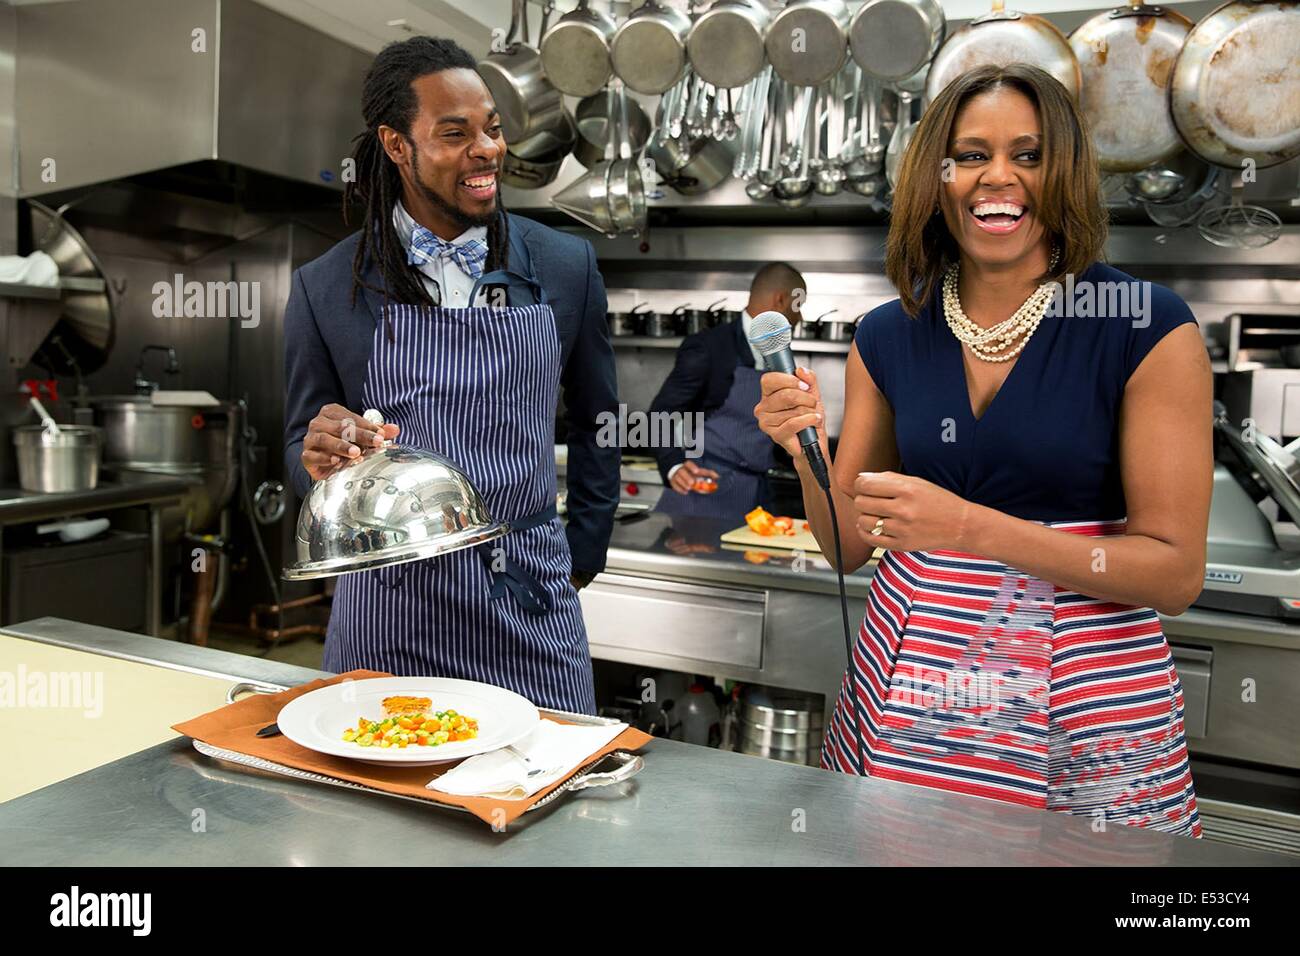 US First Lady Michelle Obama participates in a 'Let's Move!' taping with Richard Sherman of the Seattle Seahawks in the White House Kitchen May 21, 2014 in Washington, DC. Let's Move is an initiative by the First Lady to improve how children eat and exercise. Stock Photo